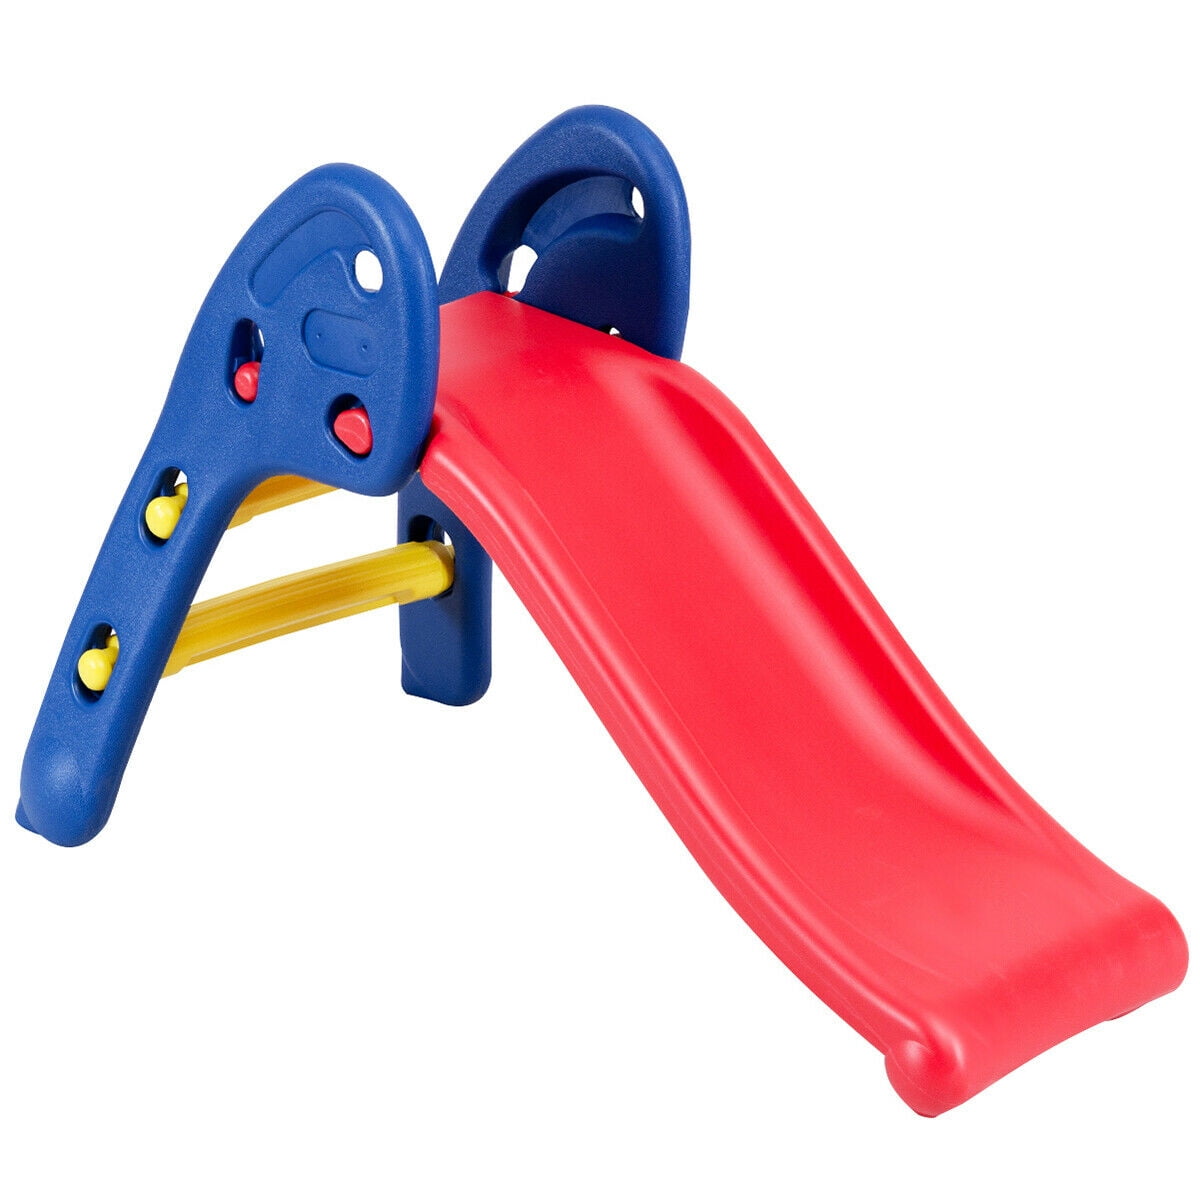 Indoor Details about   Kids First Slide Outdoor Toddler Activity Toy Red/Blue